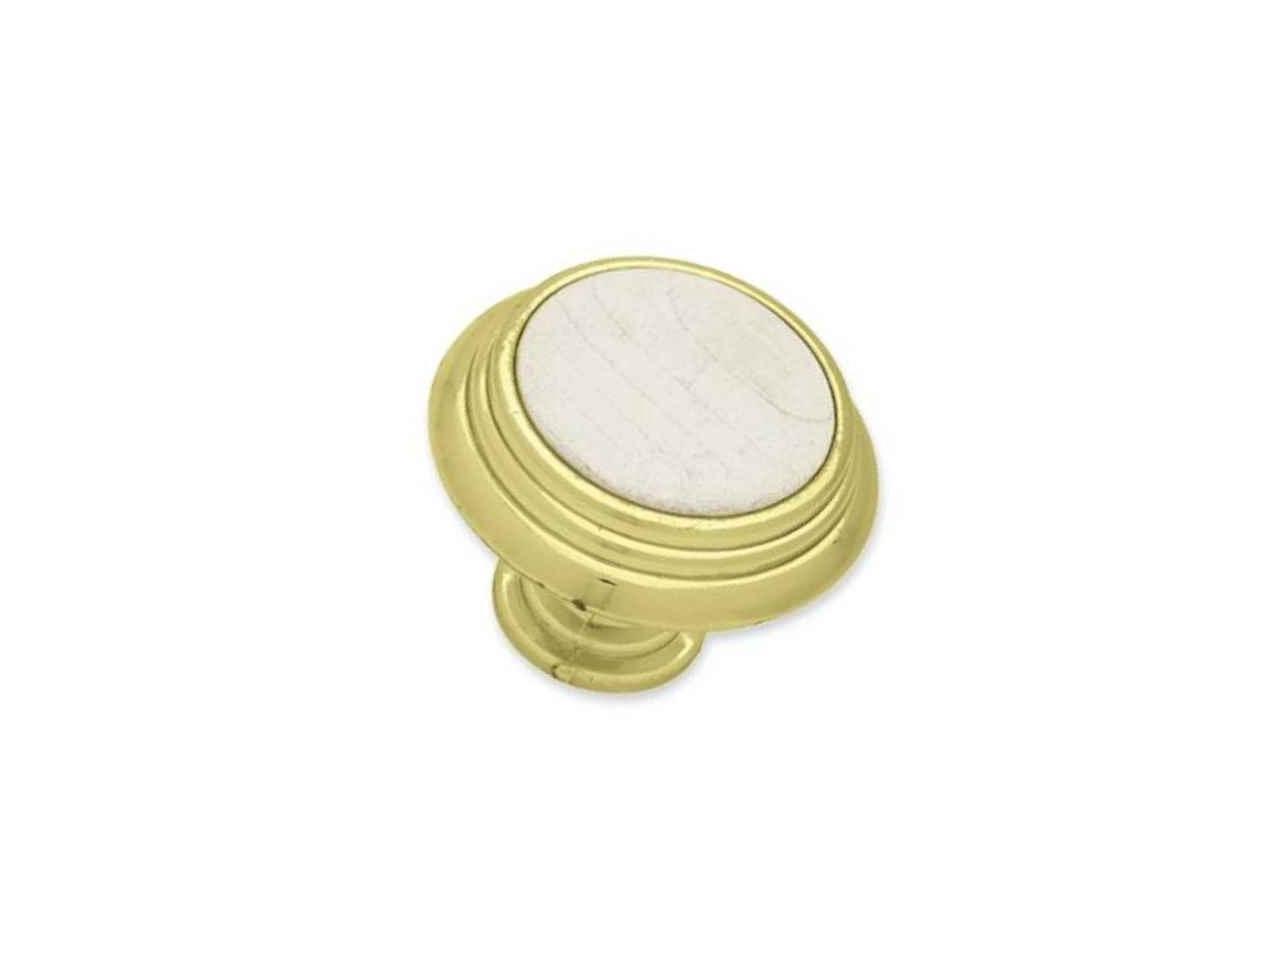 PN0276-PB  Polished Brass 5" Smiley Cabinet Drawer Pull